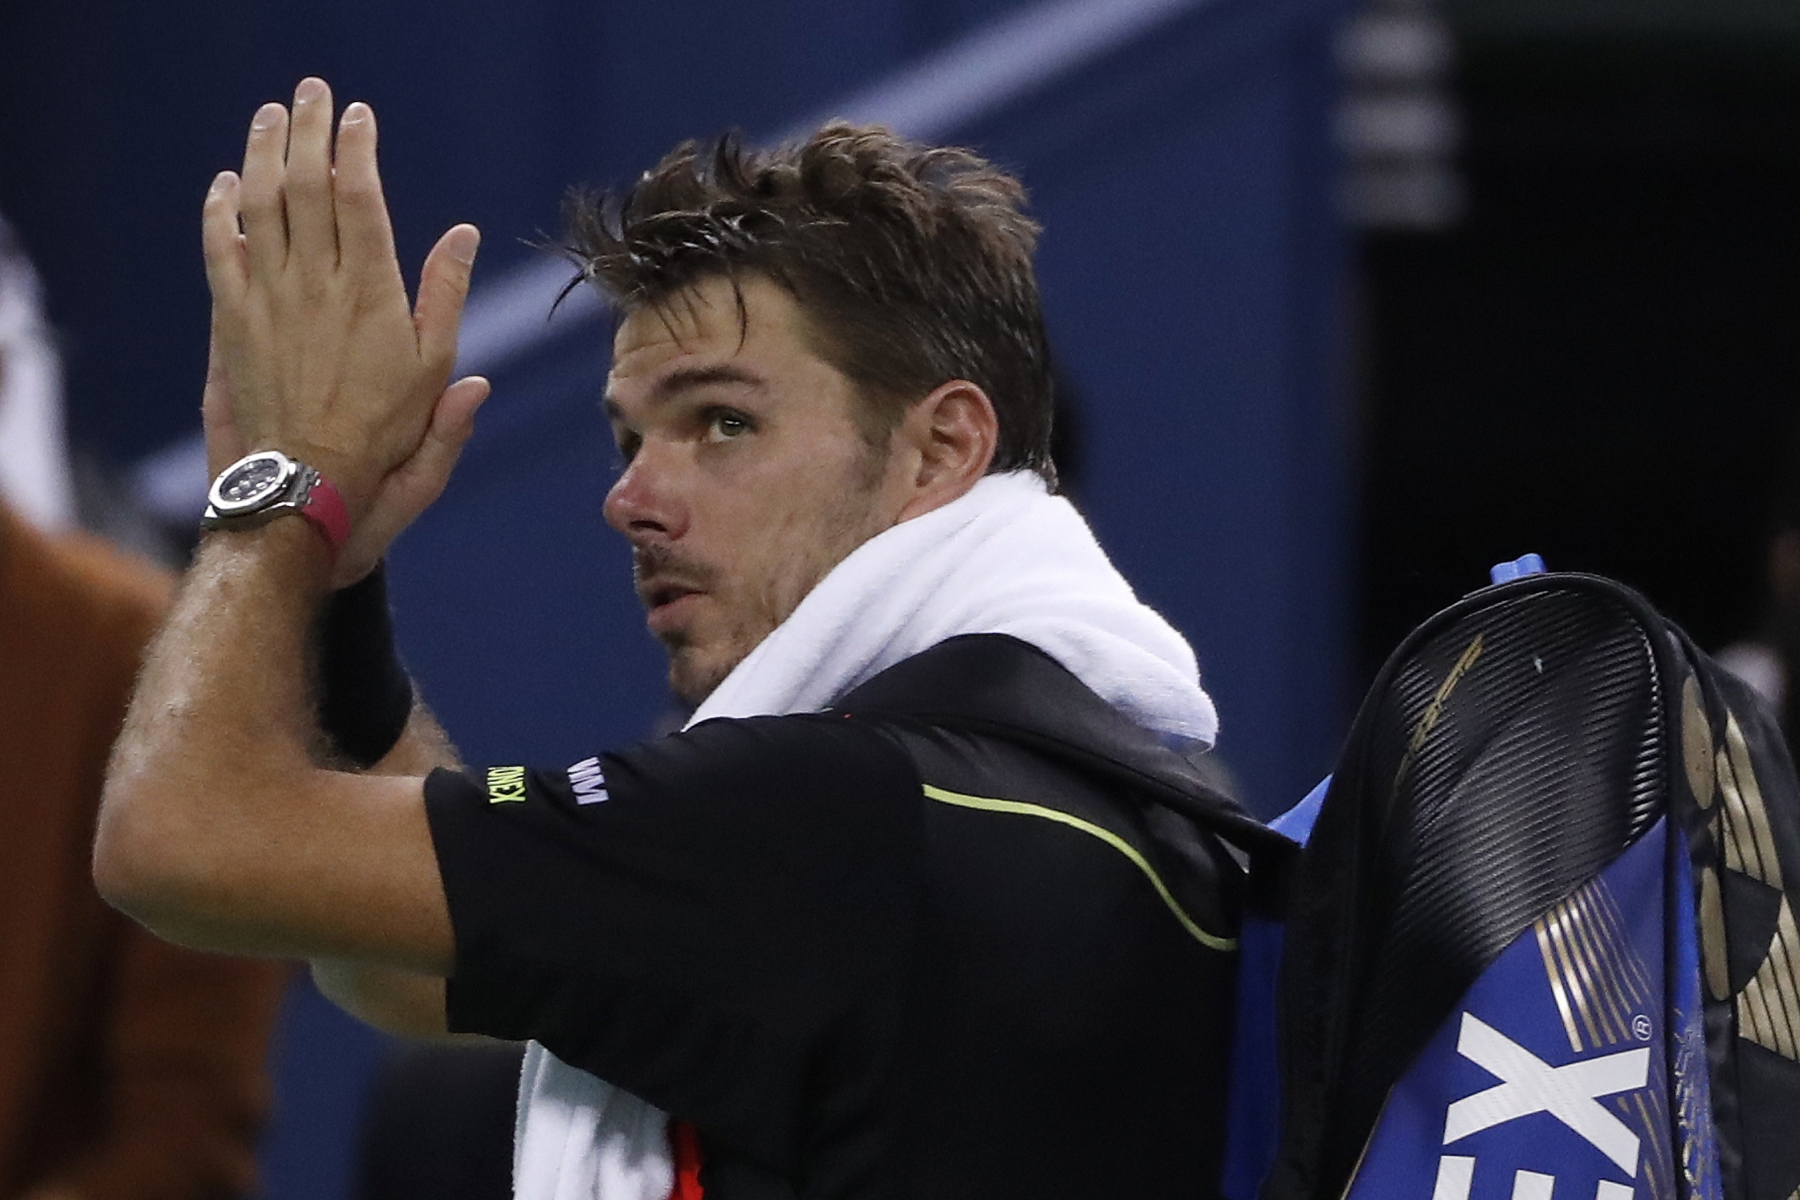 Stan Wawrinka of Switzerland gestures as he leaves the court after defeat by Giles Simon of France in the men's singles match of the Shanghai Masters tennis tournament at Qizhong Forest Sports City Tennis Center in Shanghai, China, Thursday, Oct. 13, 2016. (AP Photo/Andy Wong) China Tennis Shanghai Masters